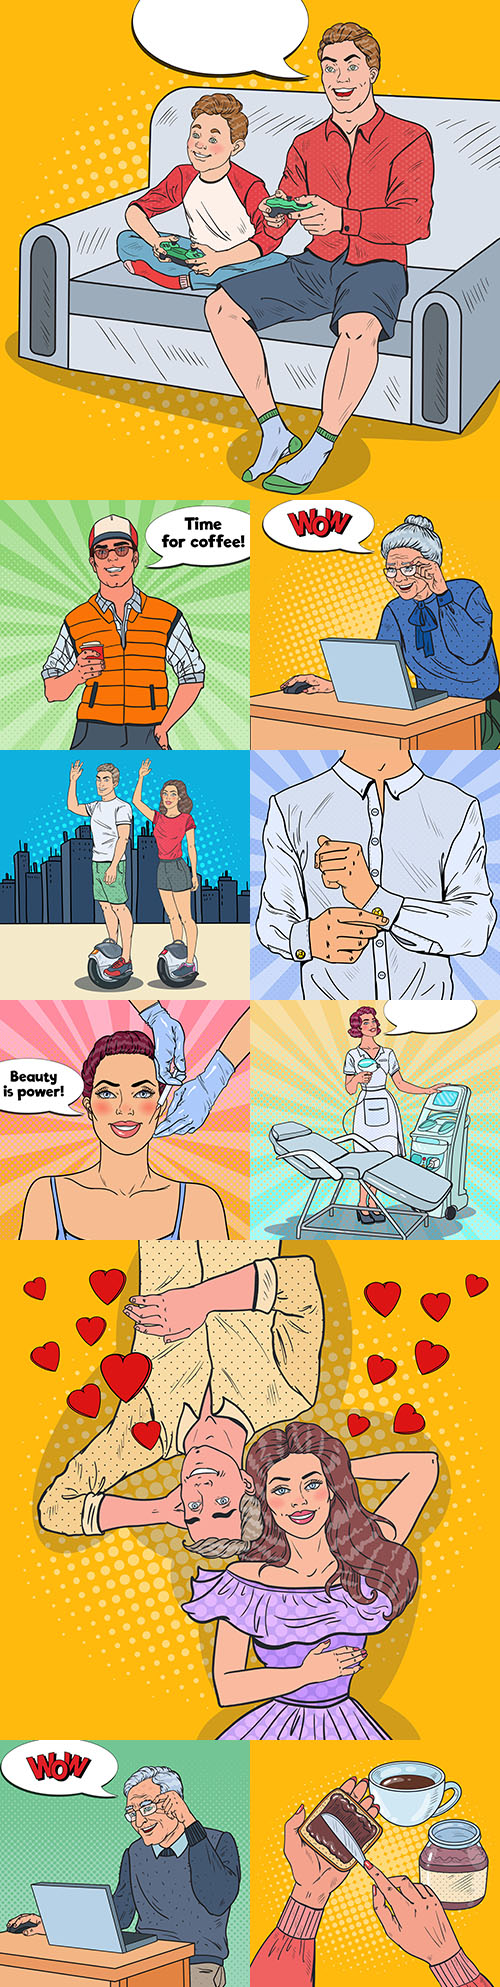 Woman and Man Pop art illustration with speech forms 5
